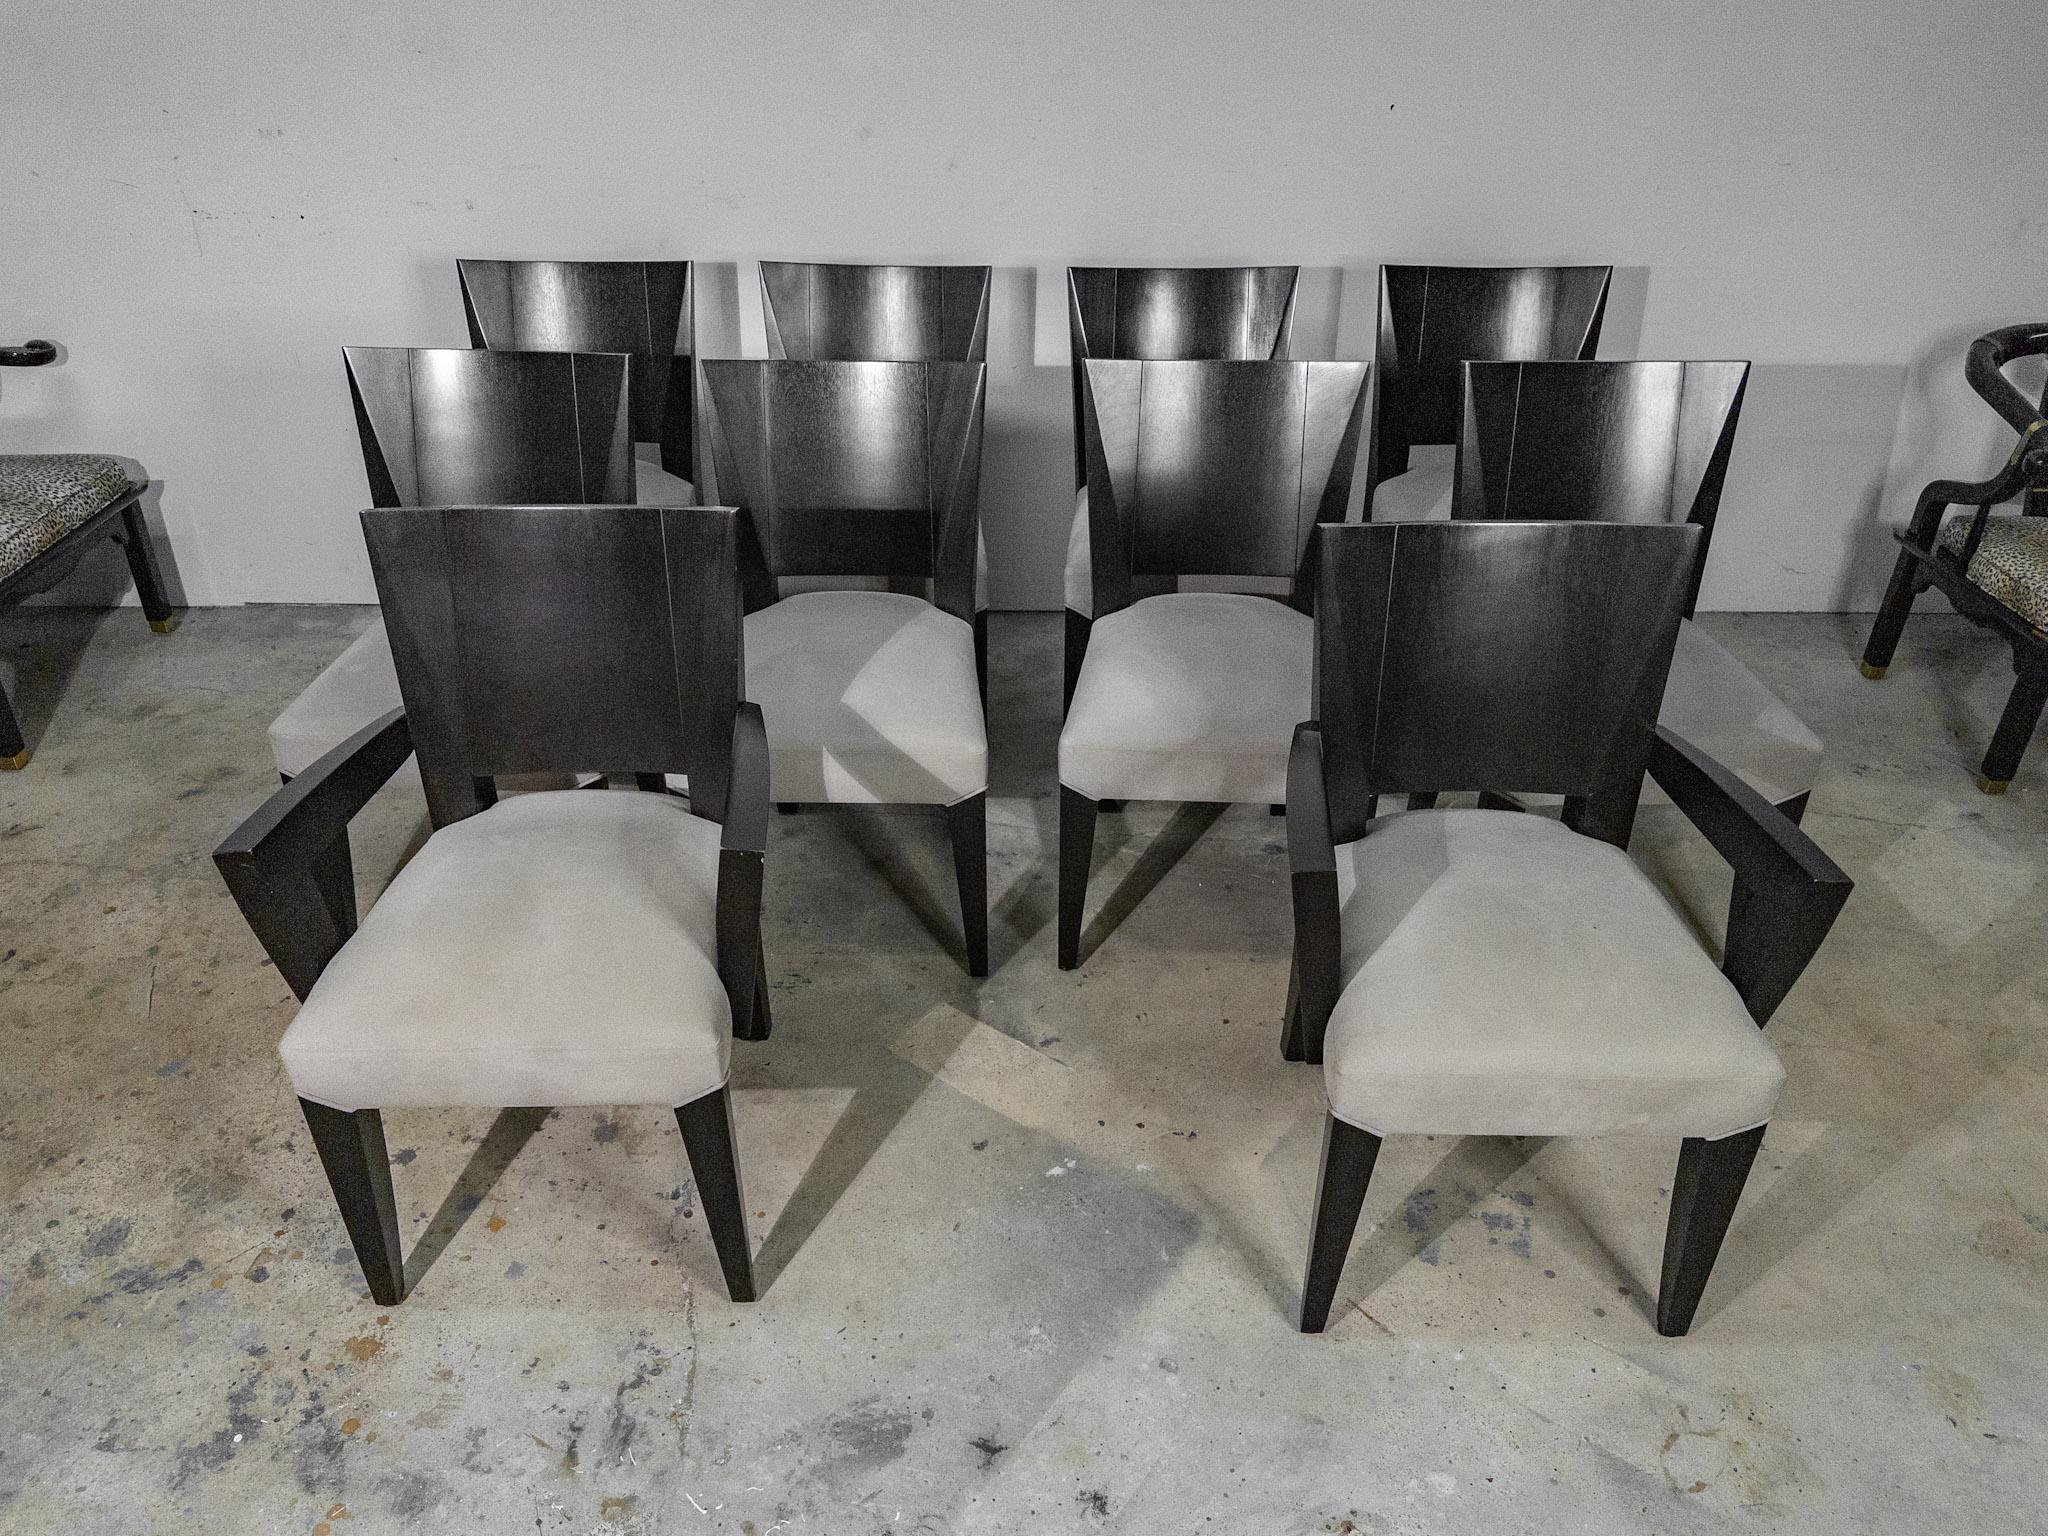 The Set of 10 Ocean Chairs by Dakota Jackson of New York is a stunning embodiment of contemporary luxury and refined craftsmanship. Consisting of two armchairs and eight side chairs, this ensemble offers both comfort and style for elegant dining